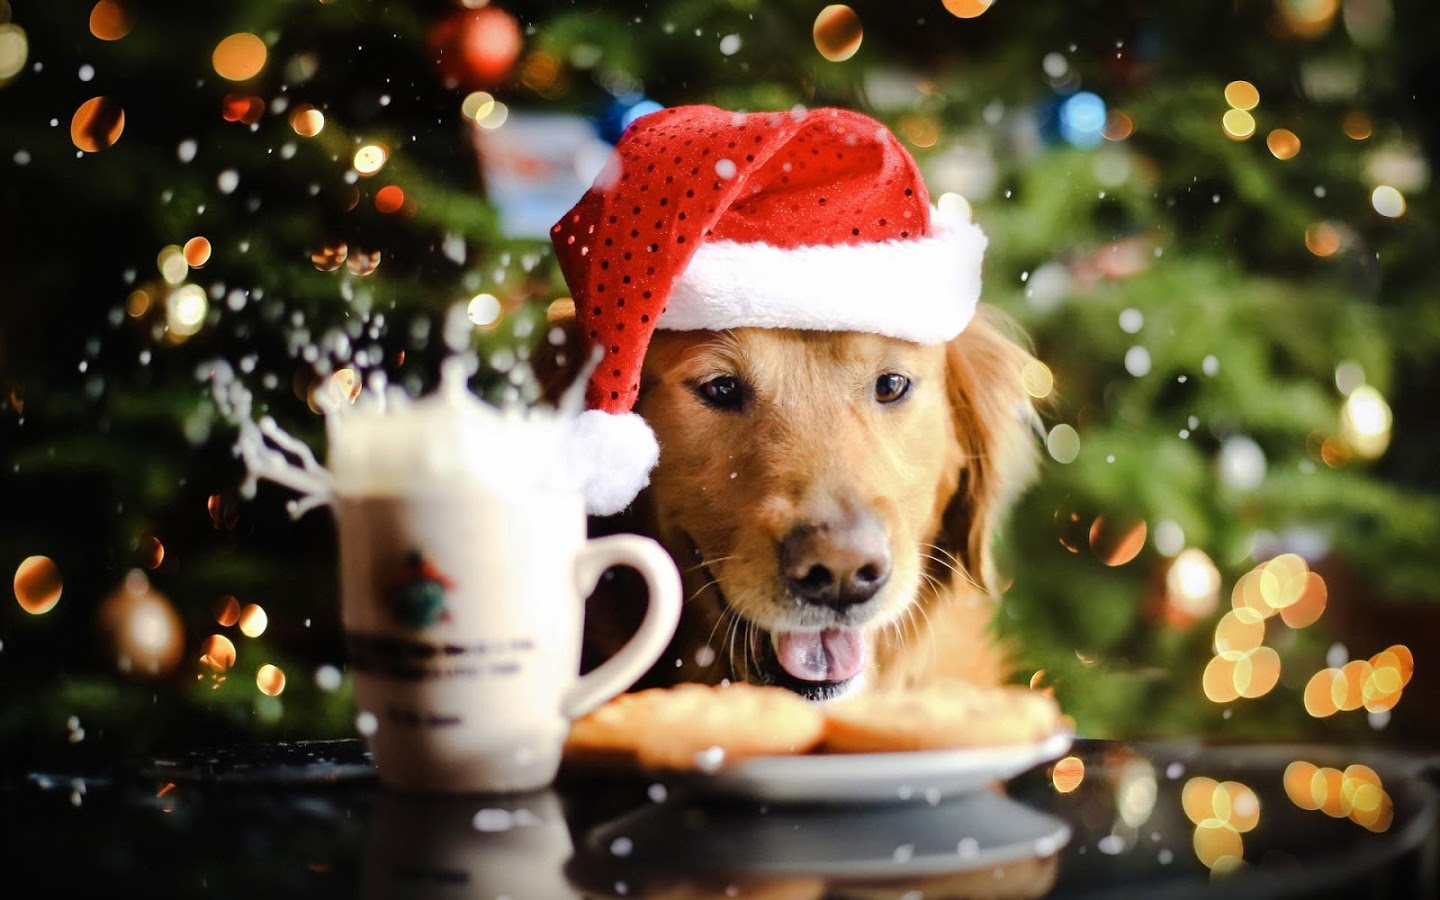 Best Dog Friendly Holiday Events For You And Your Pup